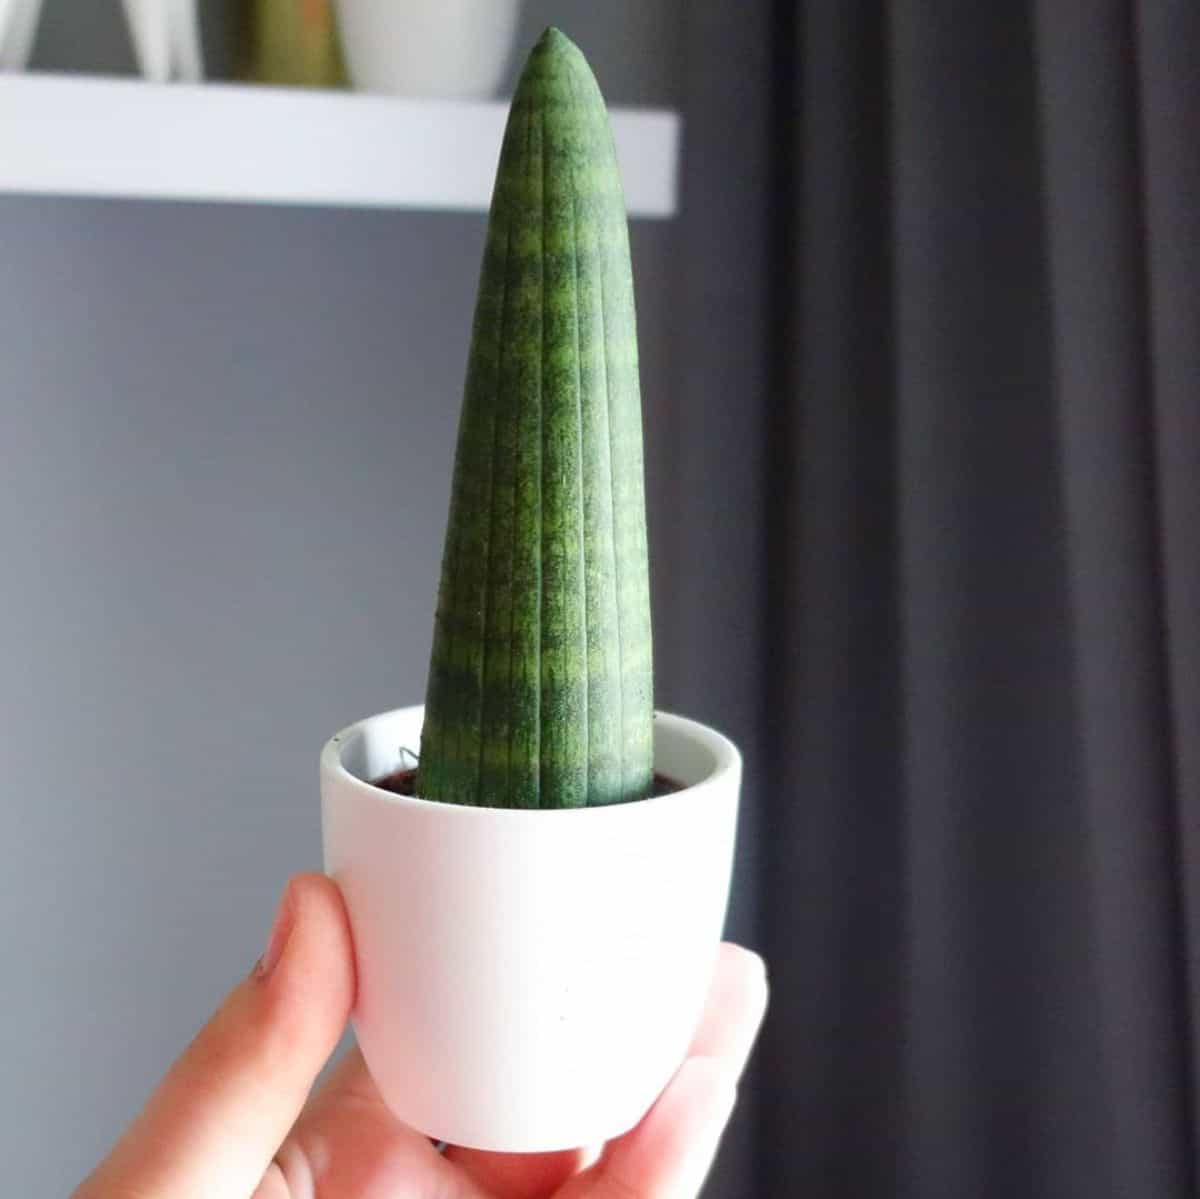 Sansevieria Oncel Rhino grows in a small white pot held by hand.